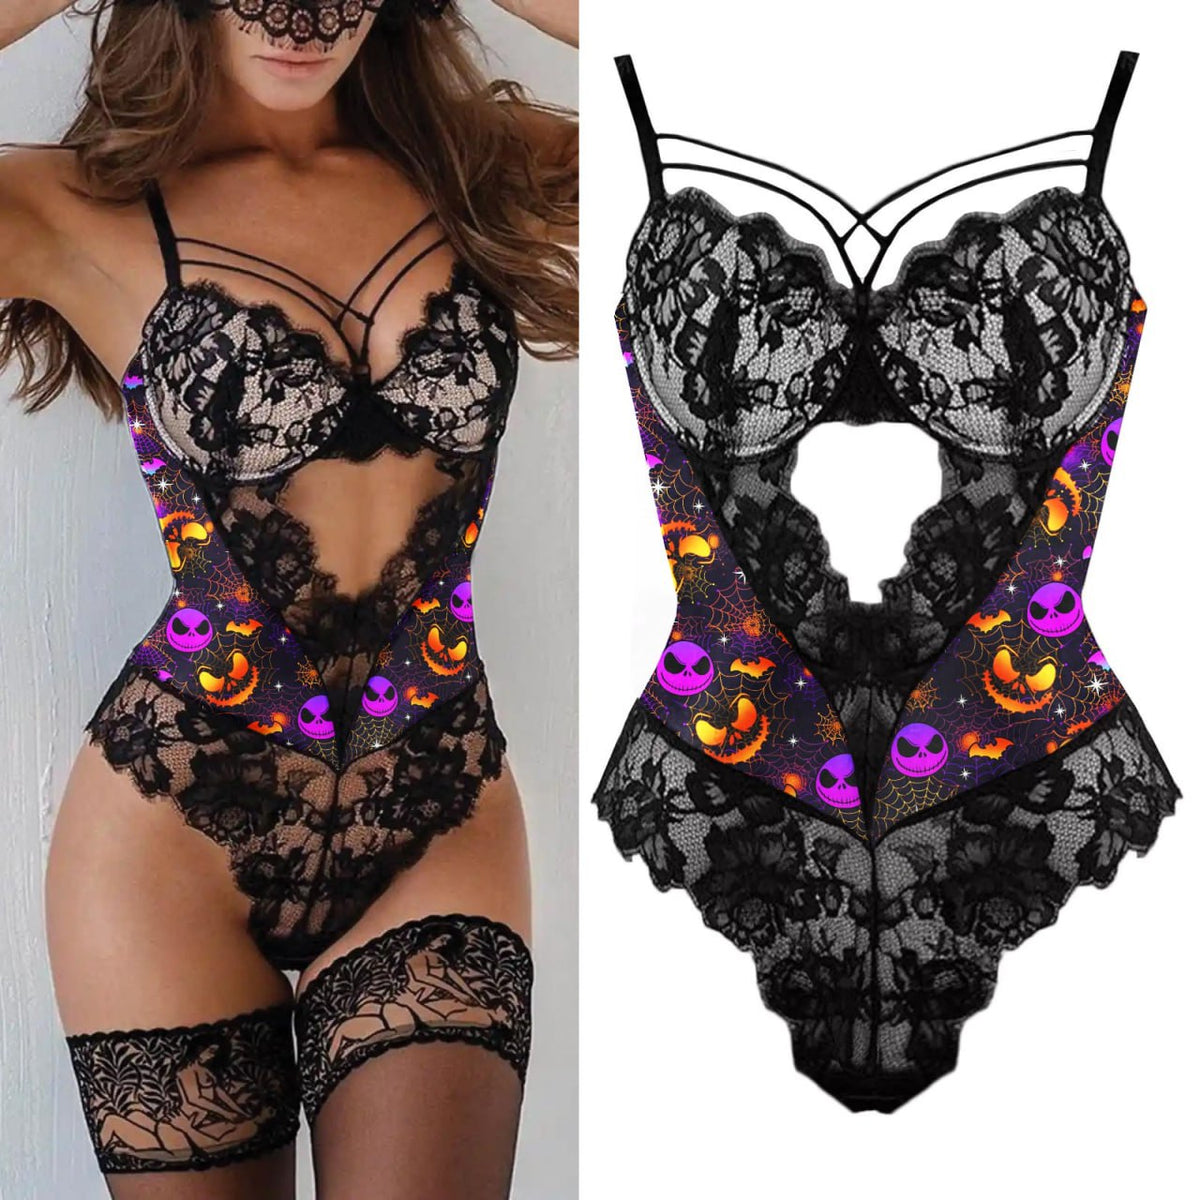 Nightmare Bandage Women's Bodysuit Sexy Hollow Lace Push Up